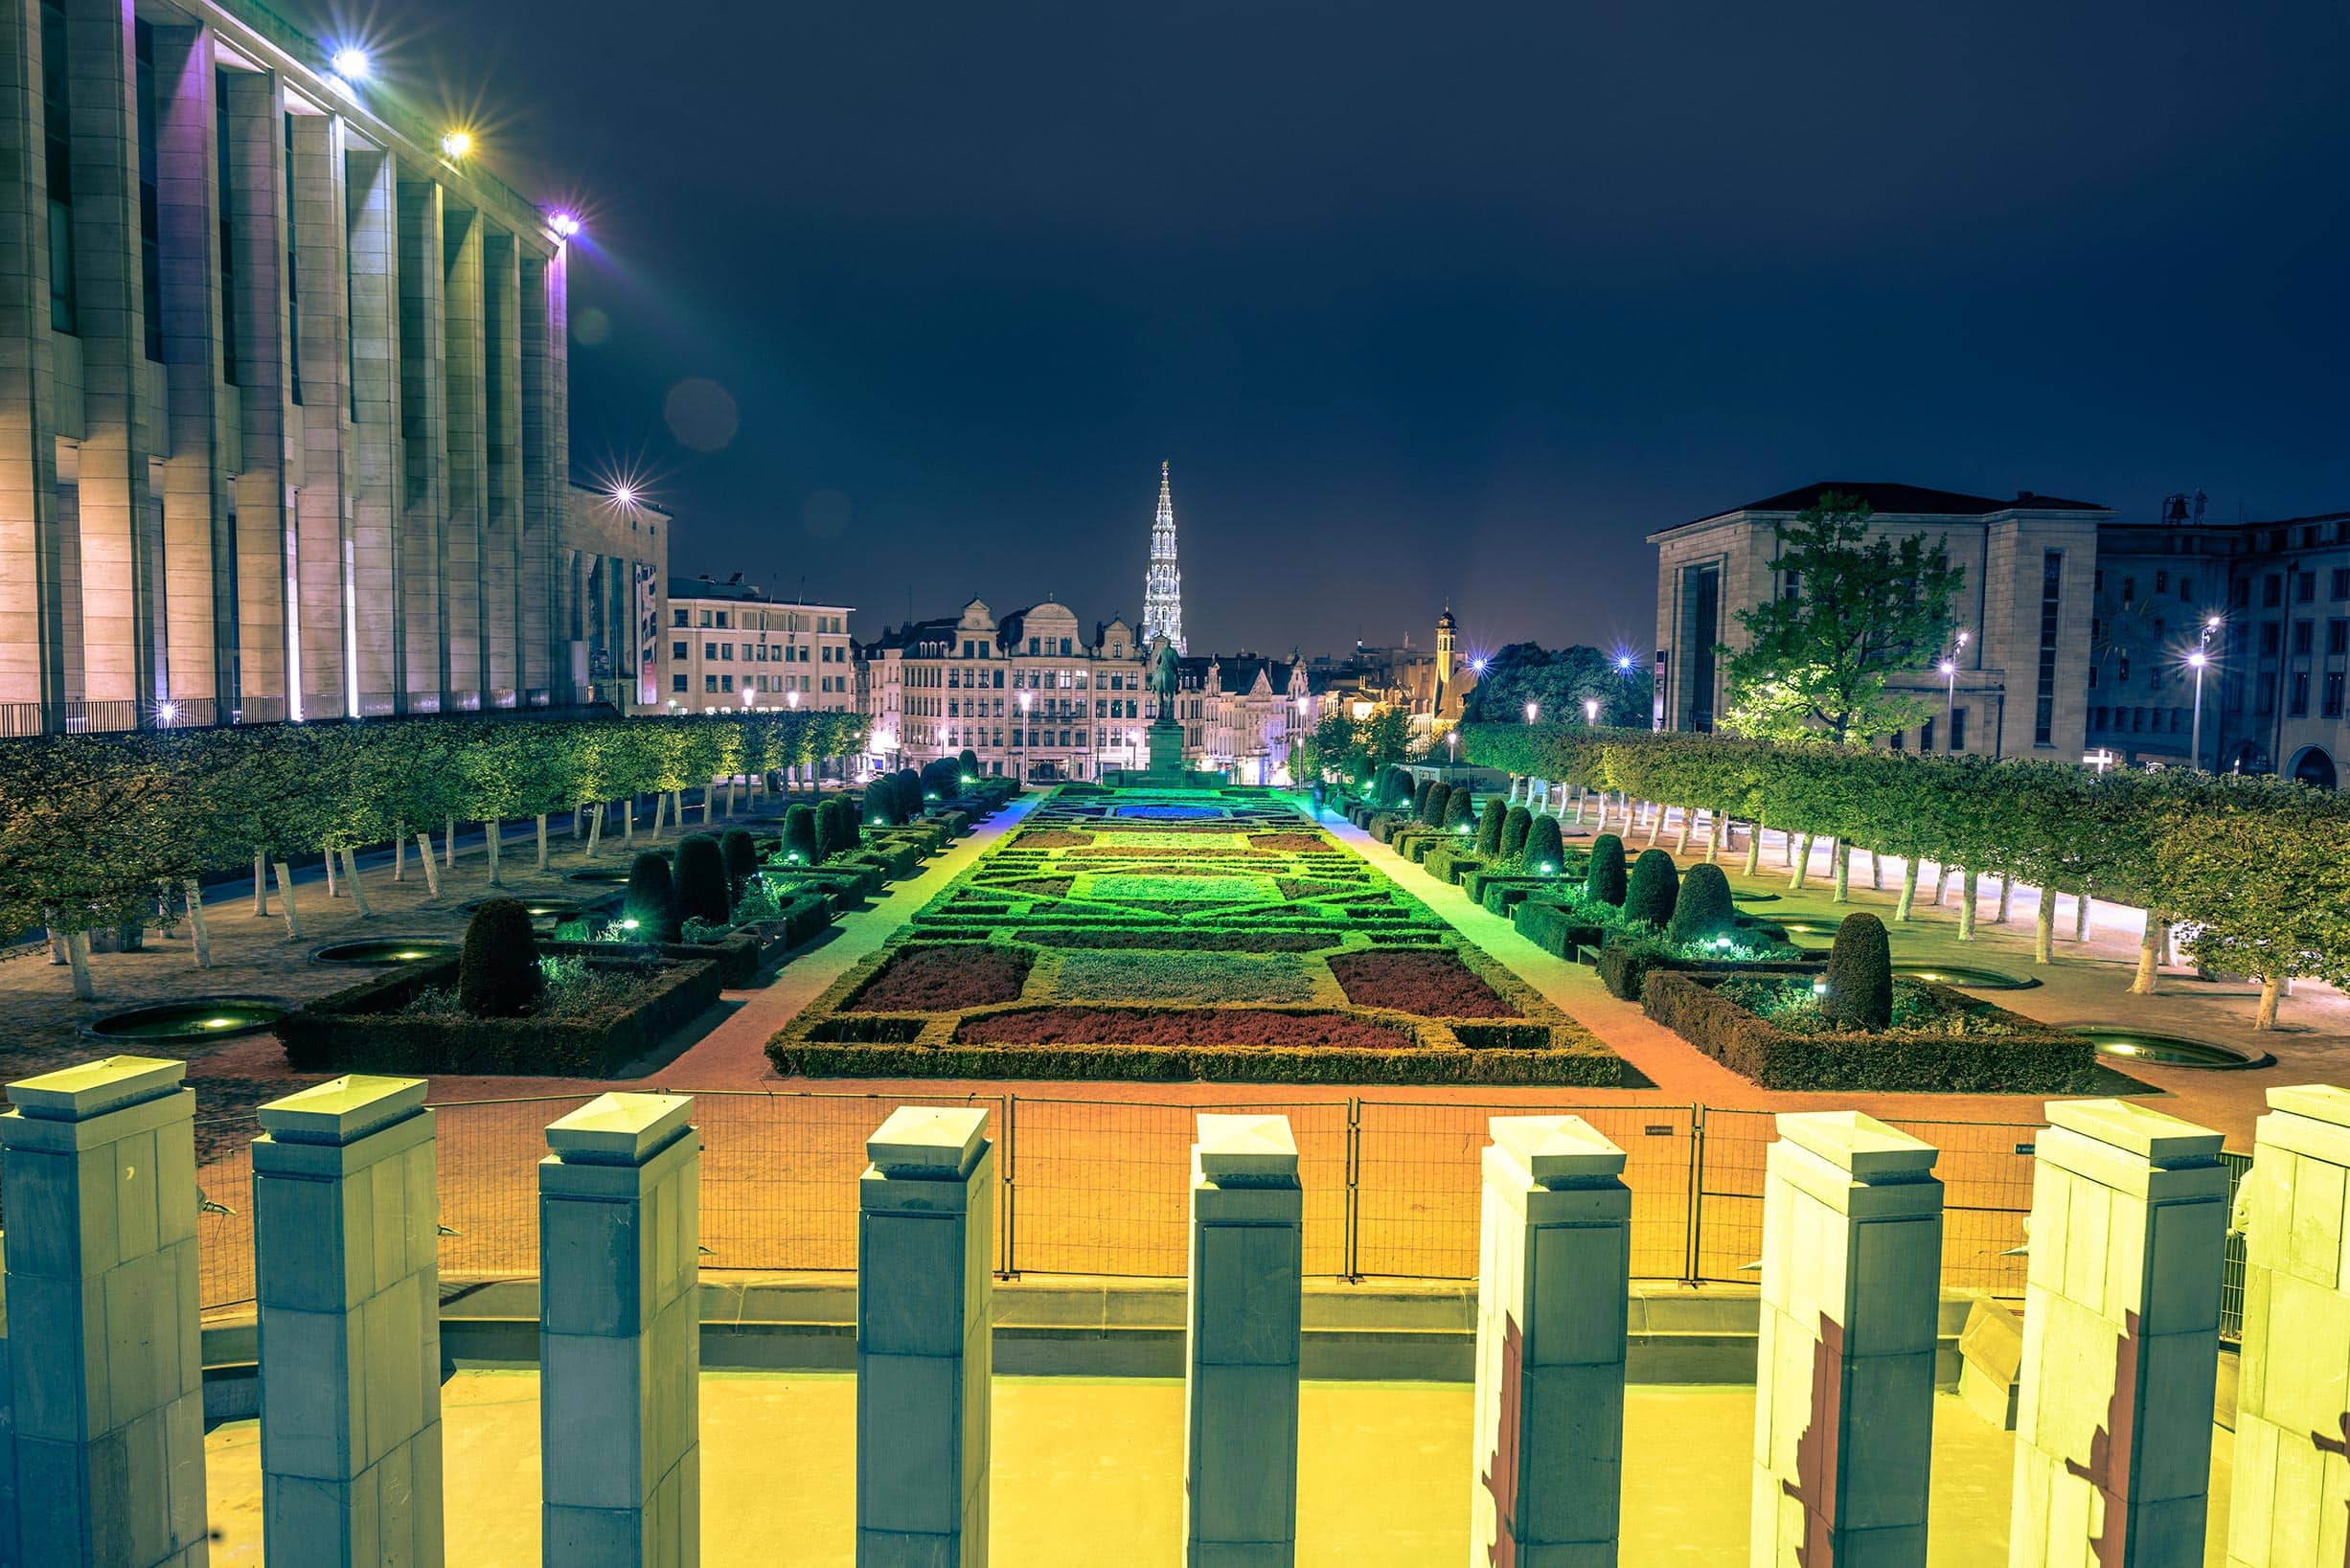 A view of a city at night with a garden in the background.